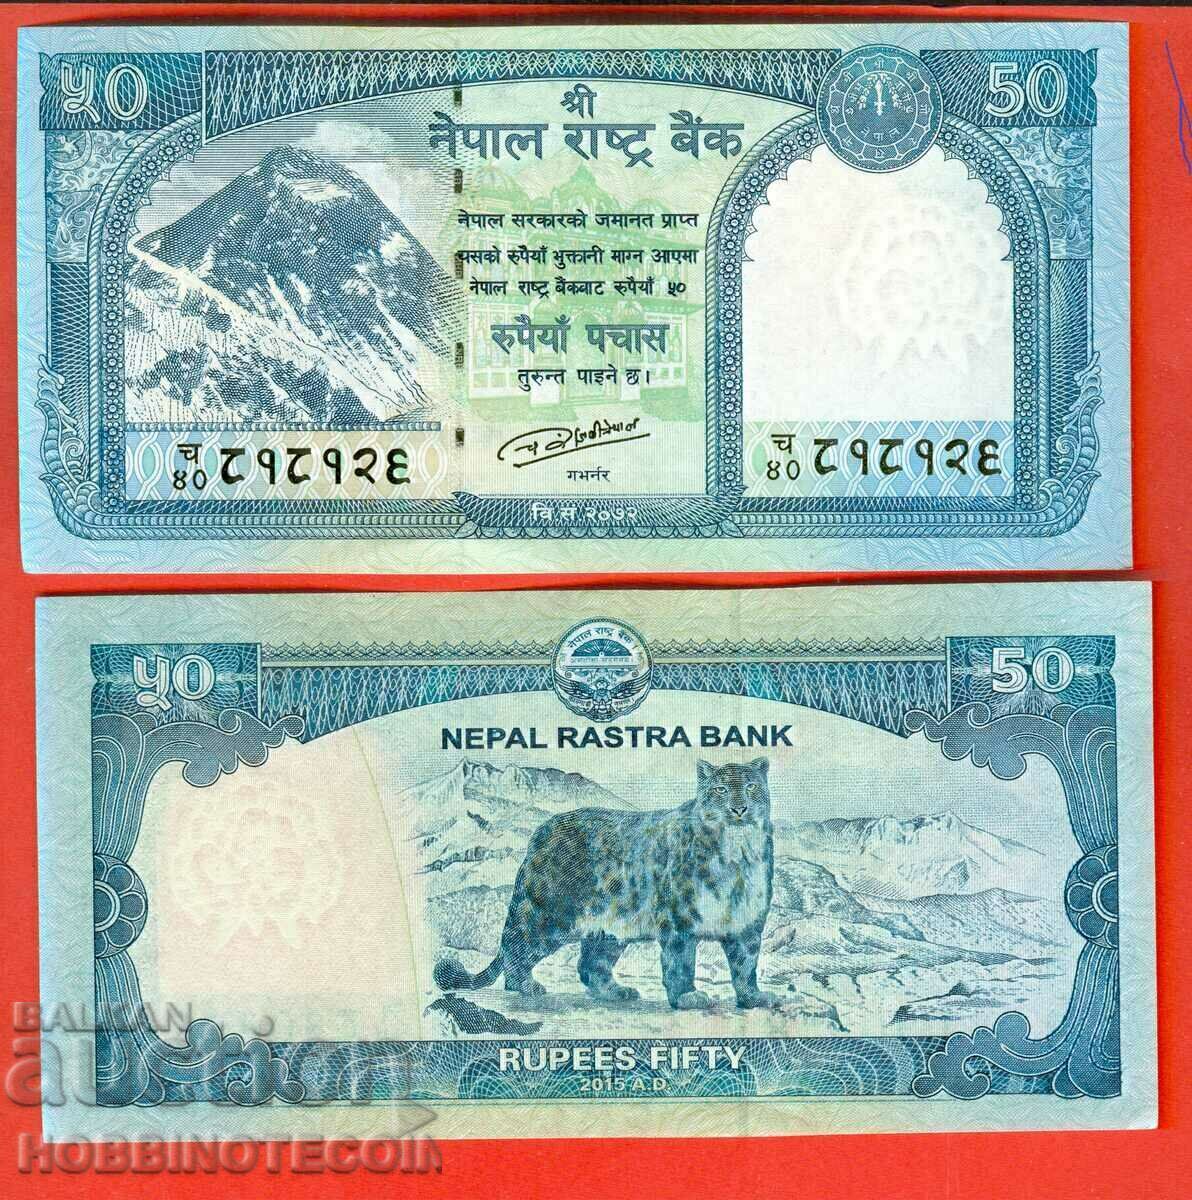 NEPAL NEPAL 50 Rupees issue issue 2015 NEW UNC NEW BACK